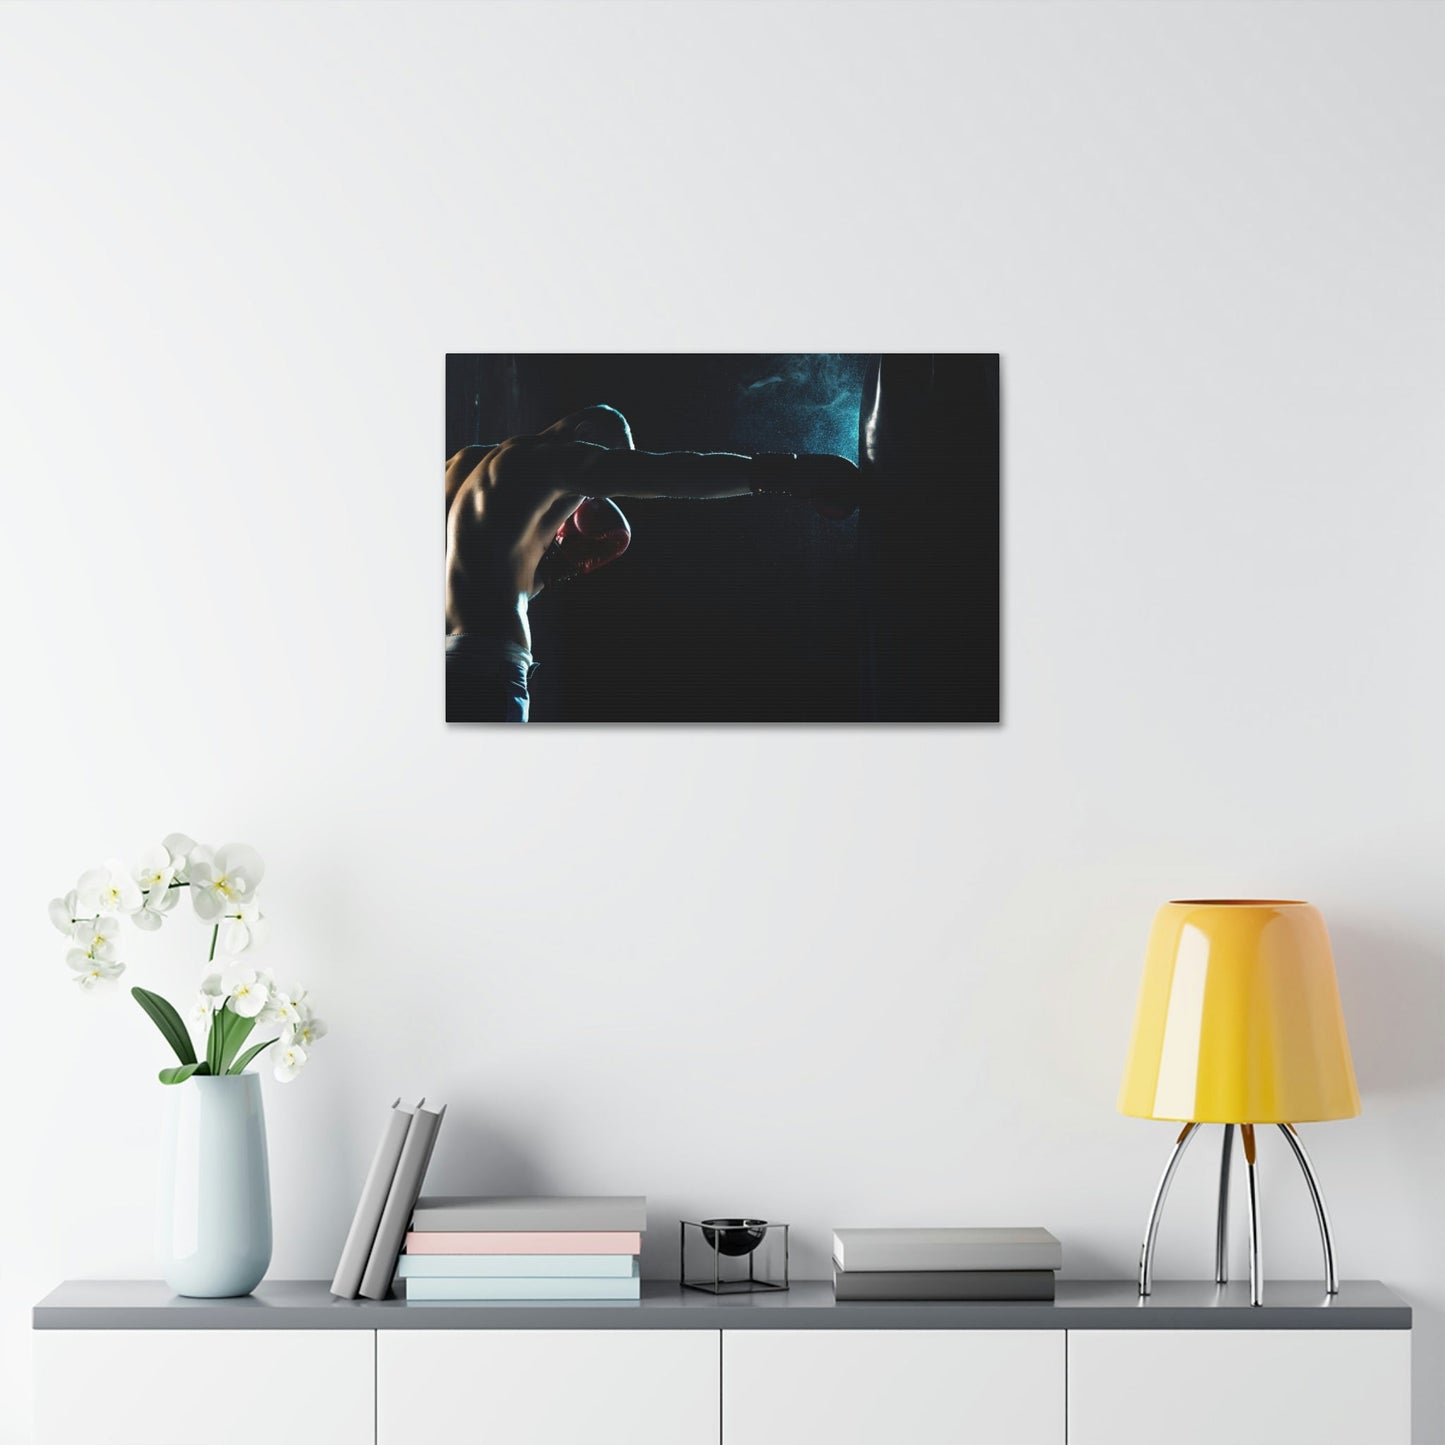 Boxing Dreams: Wall Art and Print on Canvas with Dreamy Boxing Art